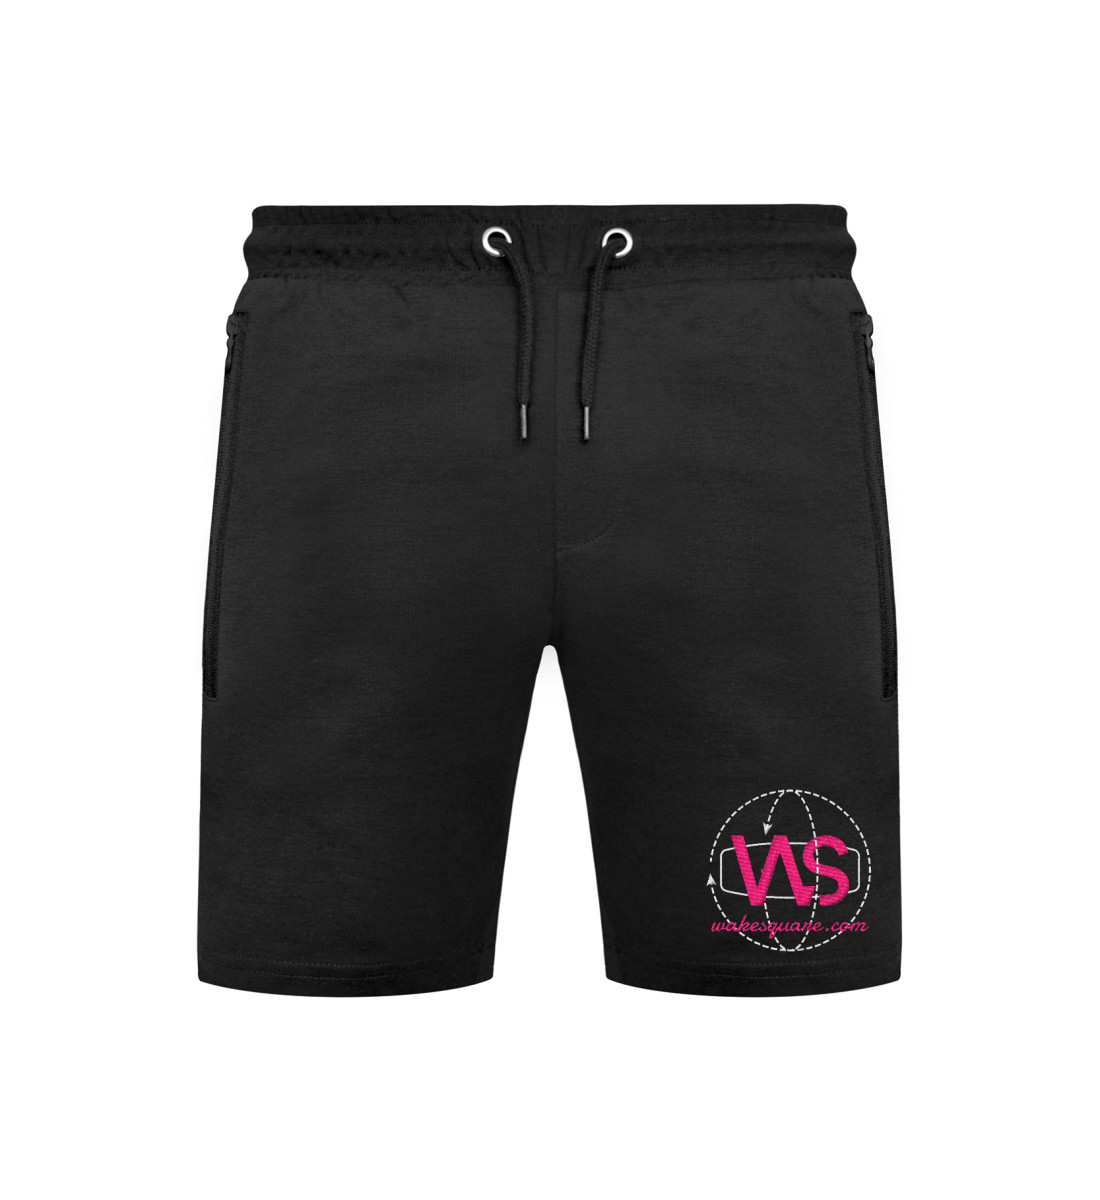 Shorts Classic Wakeskate Rotations - Unisex Sweat Shorts with Embroidery-16